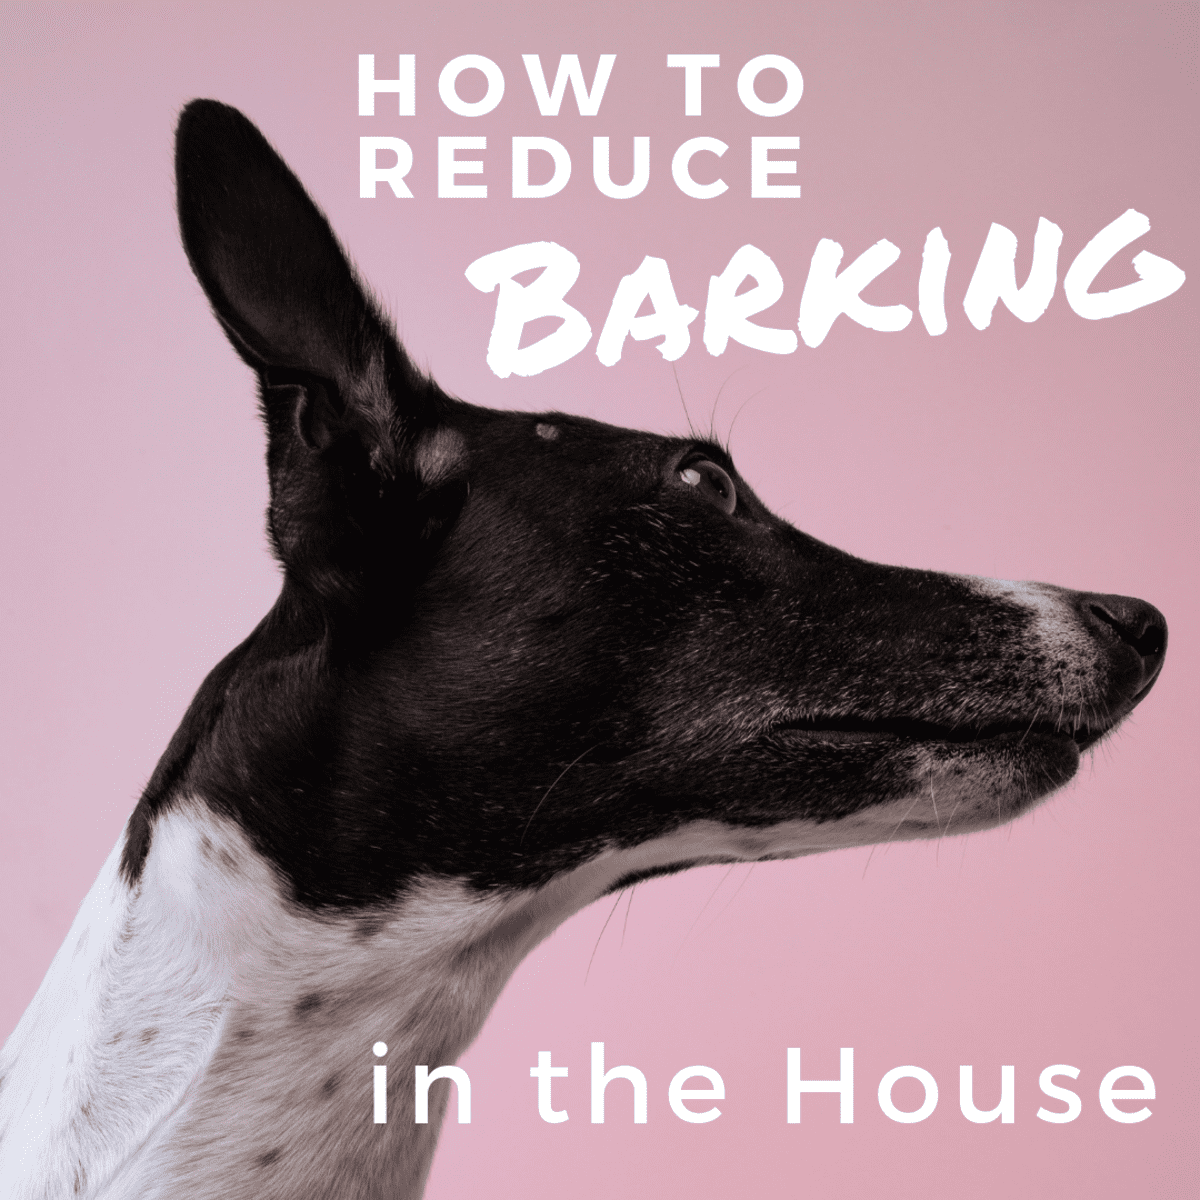 how to stop dog barking when visitors come